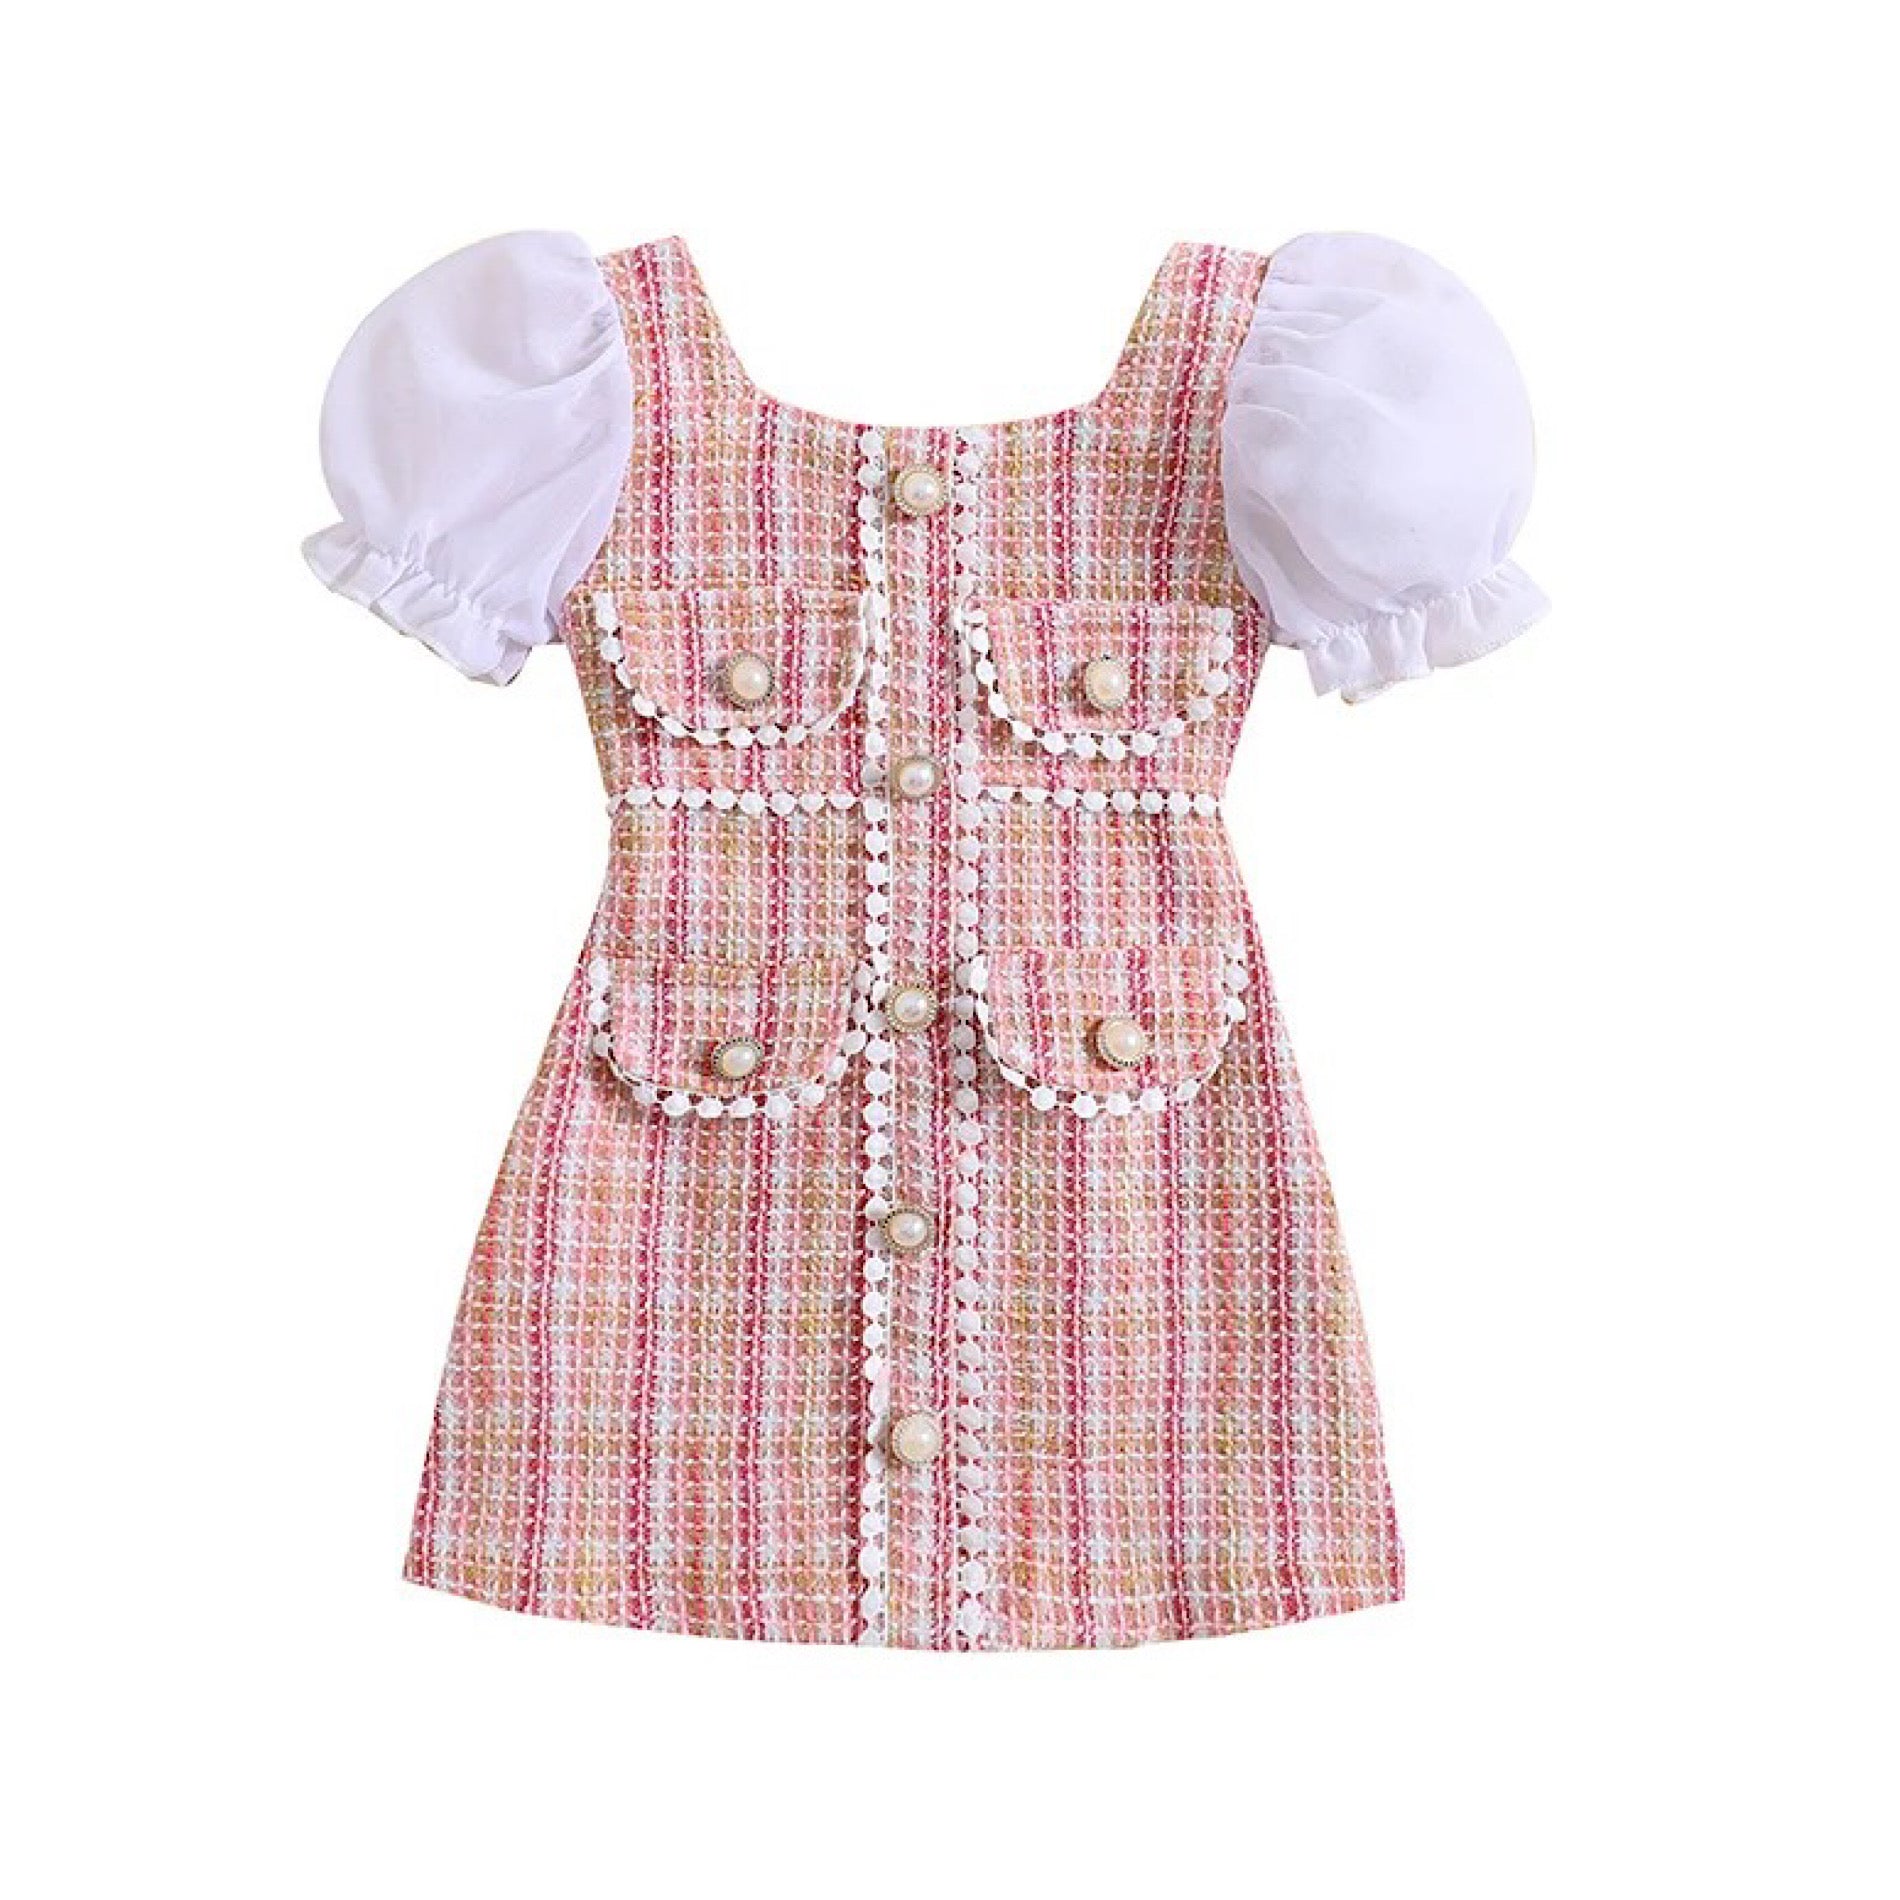 Toddler Girls Pink Plaid Dress Puff Sleeve Pearl Trimmed Spring Dress, Main Image